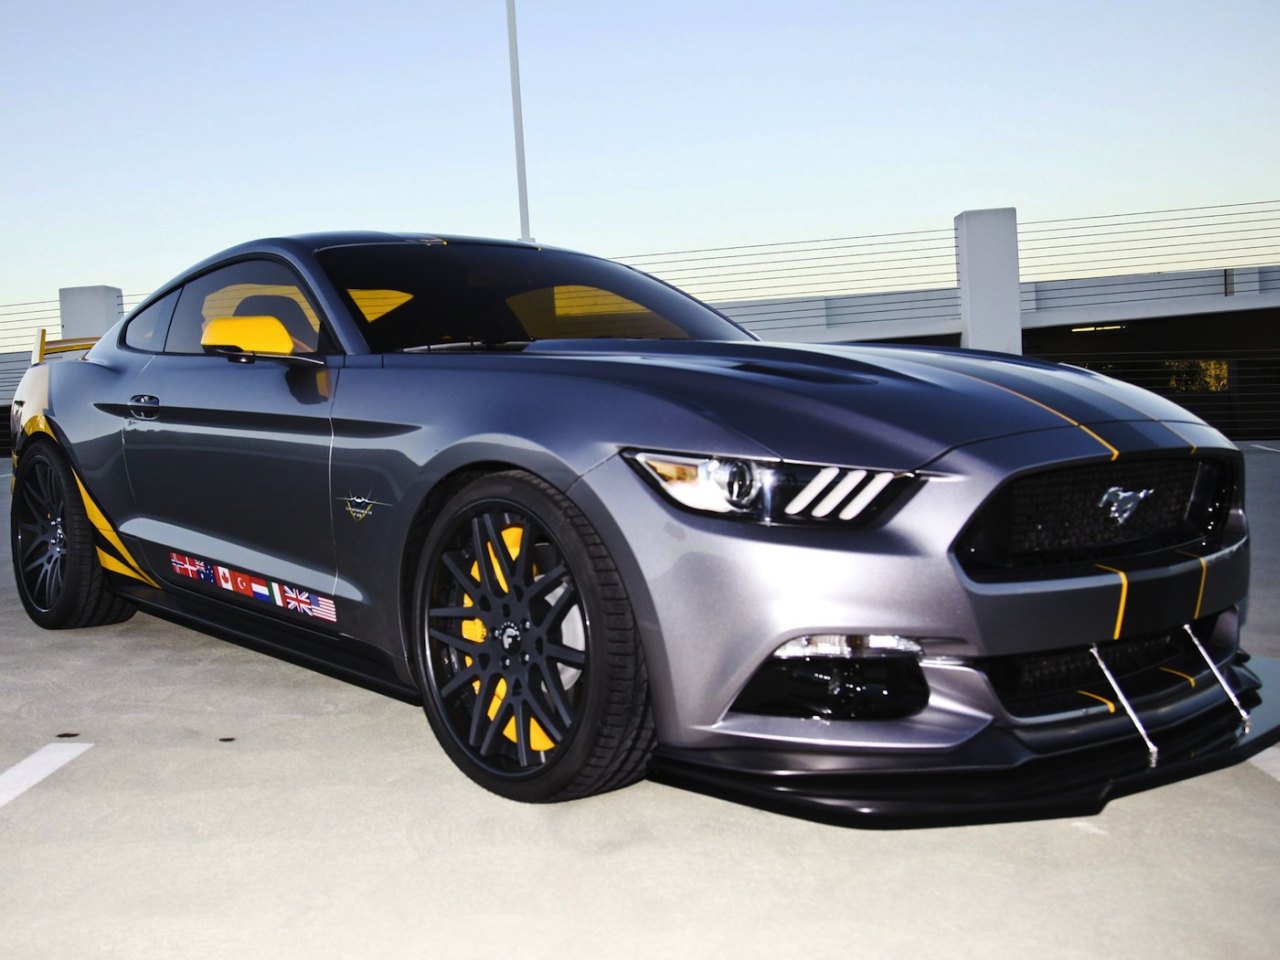 Ford Mustang F-35 Lightning II Edition: one-off voor goede doel